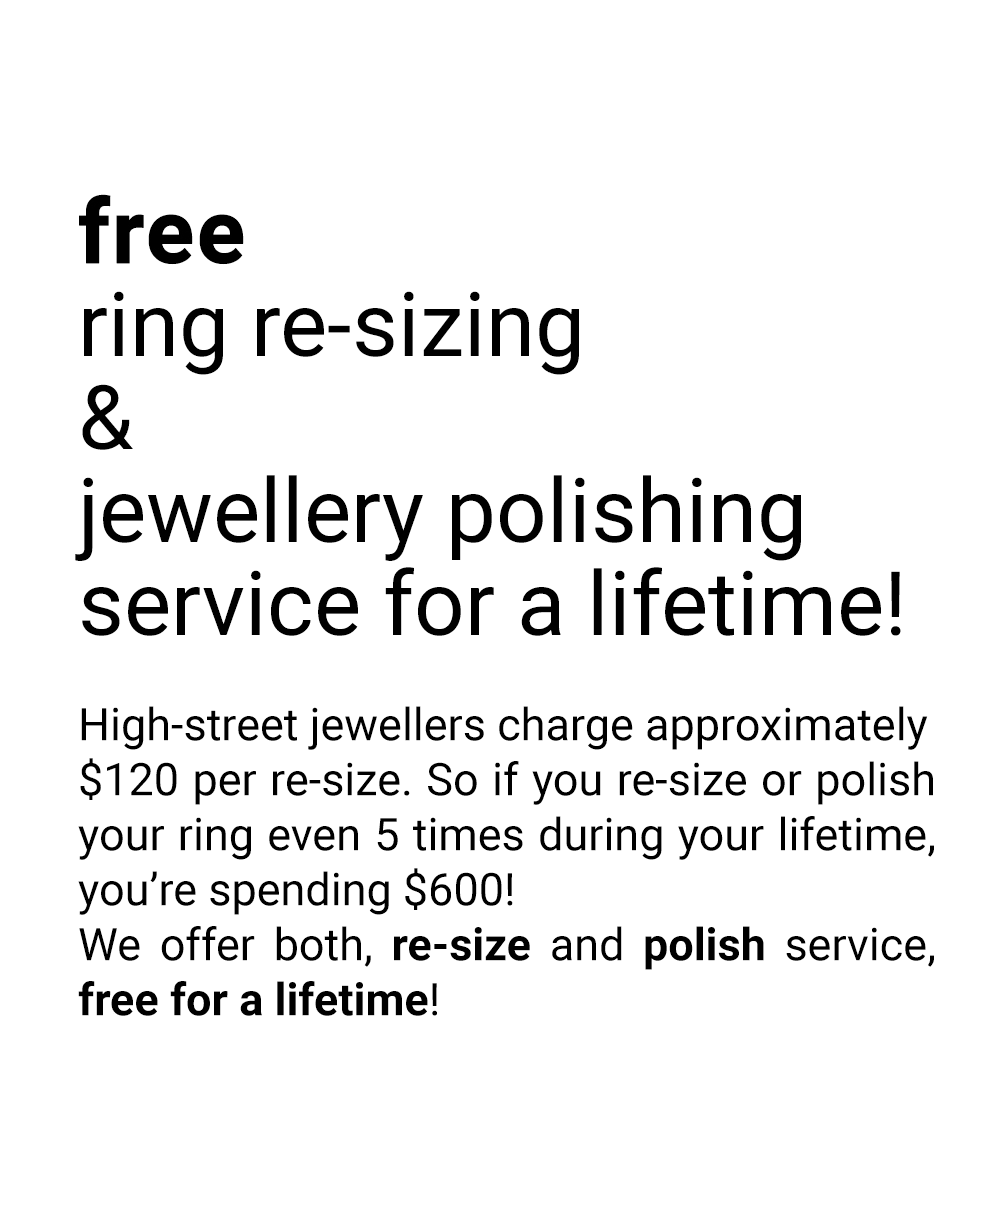 We offer both, re-size and polish service, free for a lifetime!